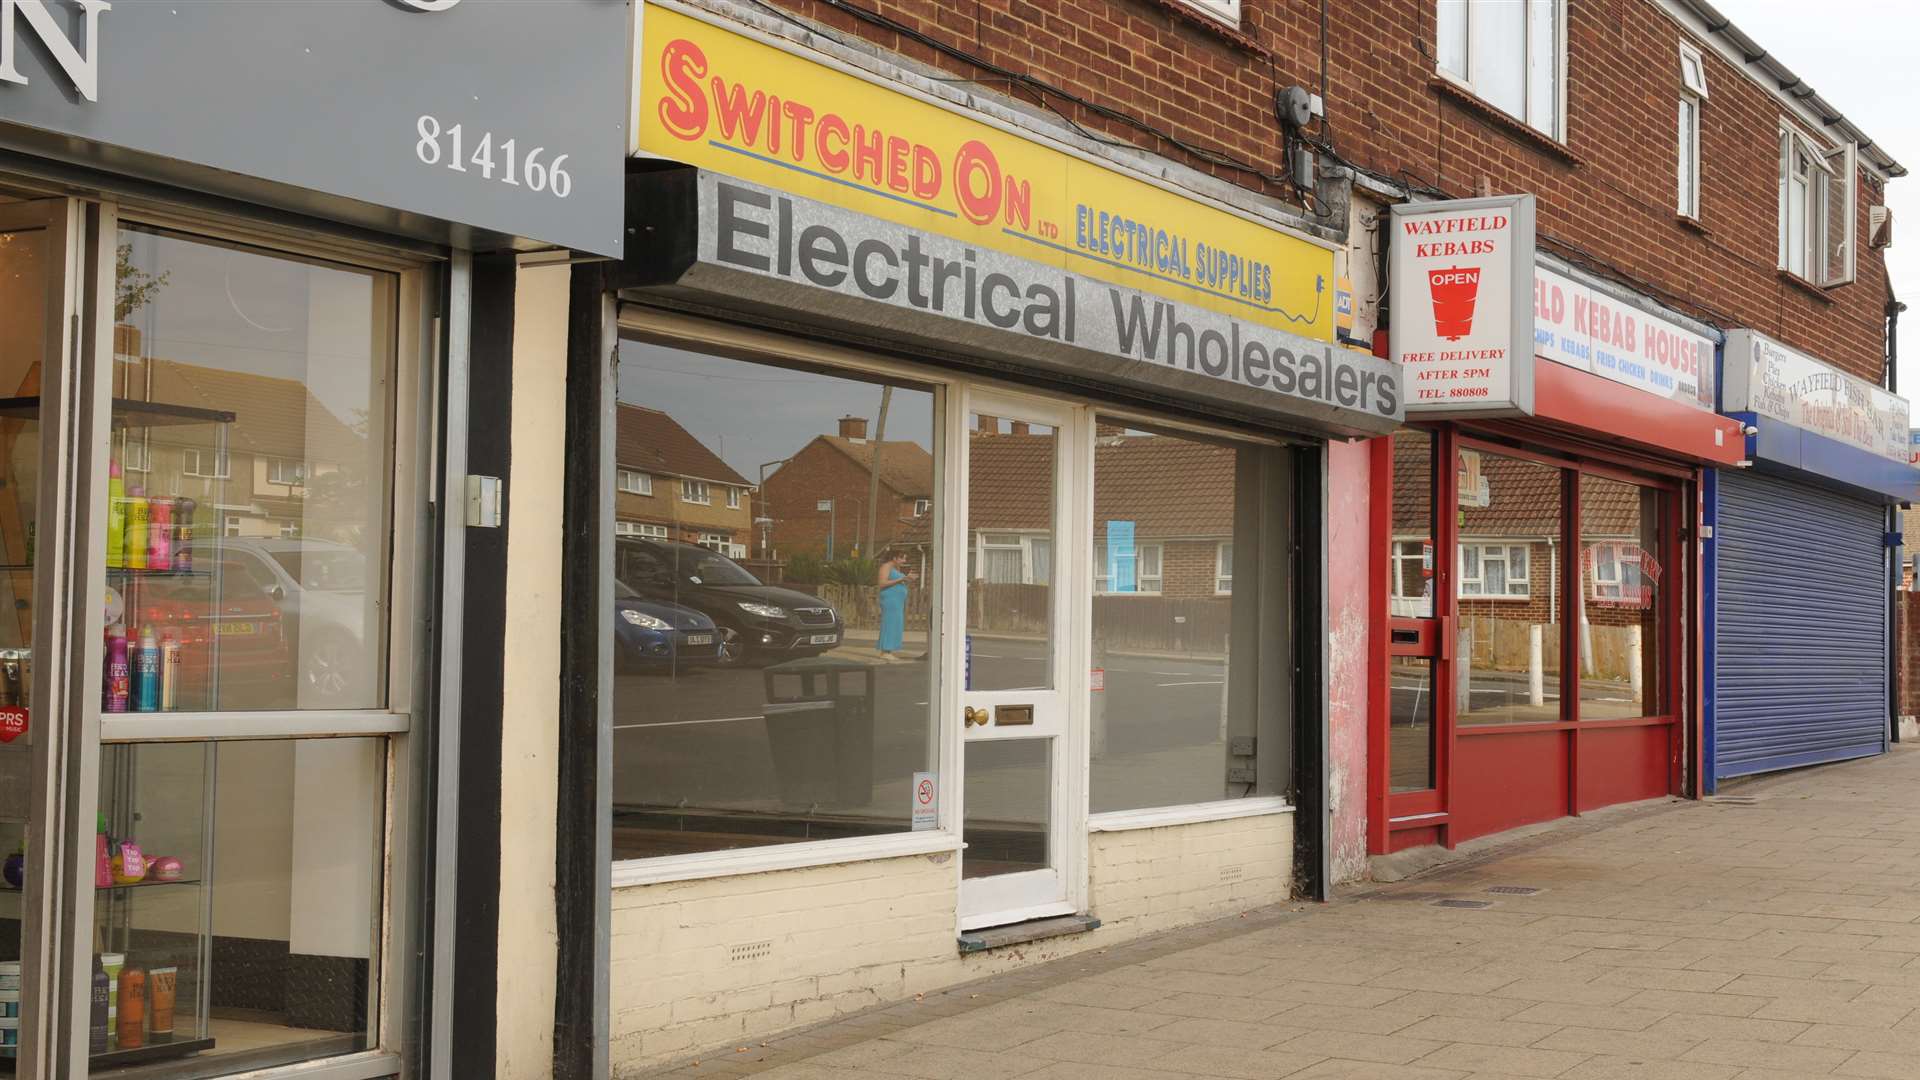 The application to turn the electrical shop into an off-licence was granted.